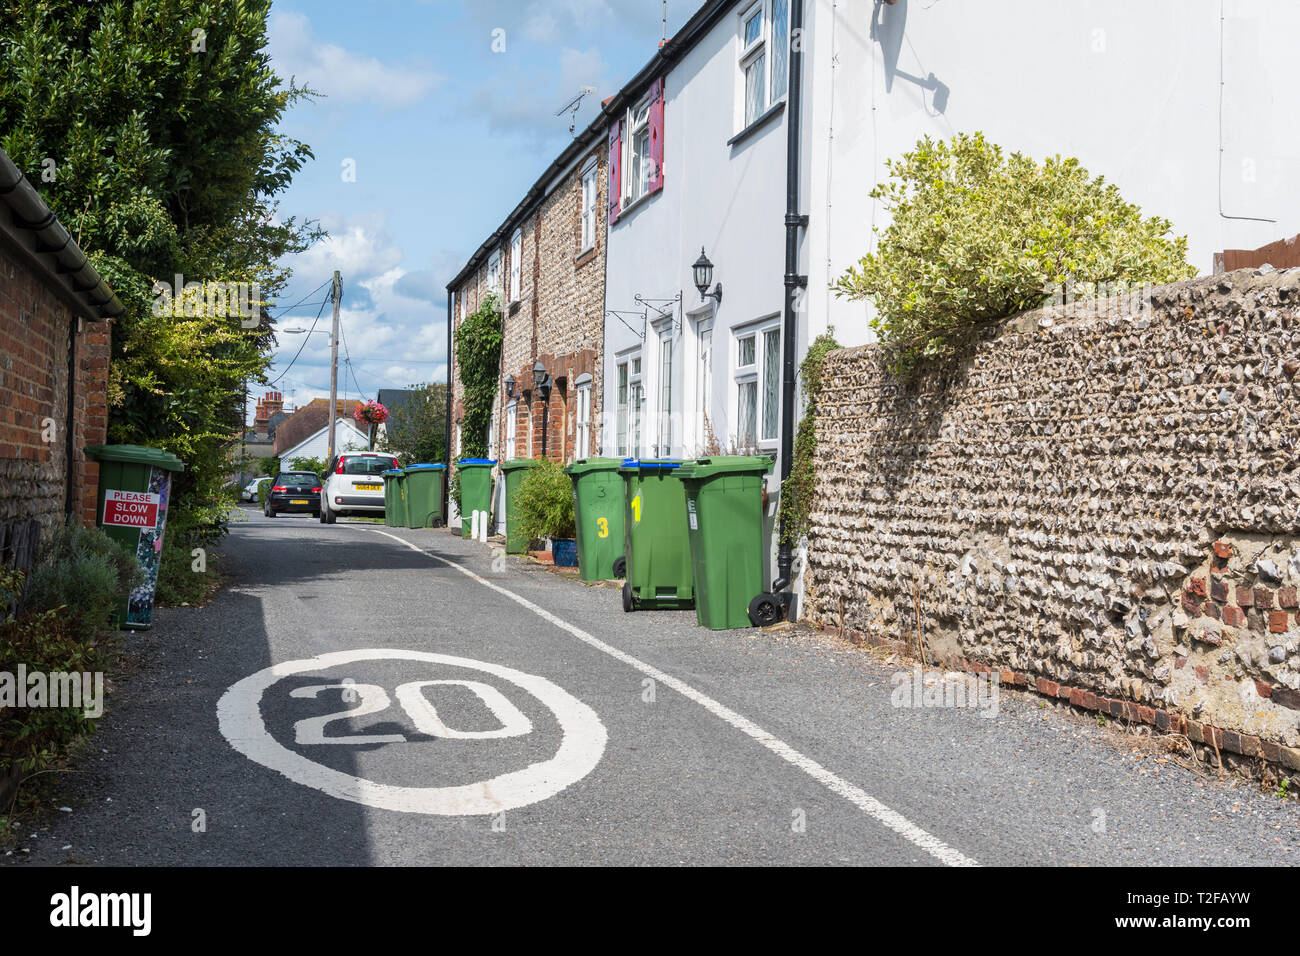 20MPH speed restriction sign painted in a narrow road in a British town in Upper Beeding, West Sussex, UK. 20MPH speed limit in a narrow street. Stock Photo